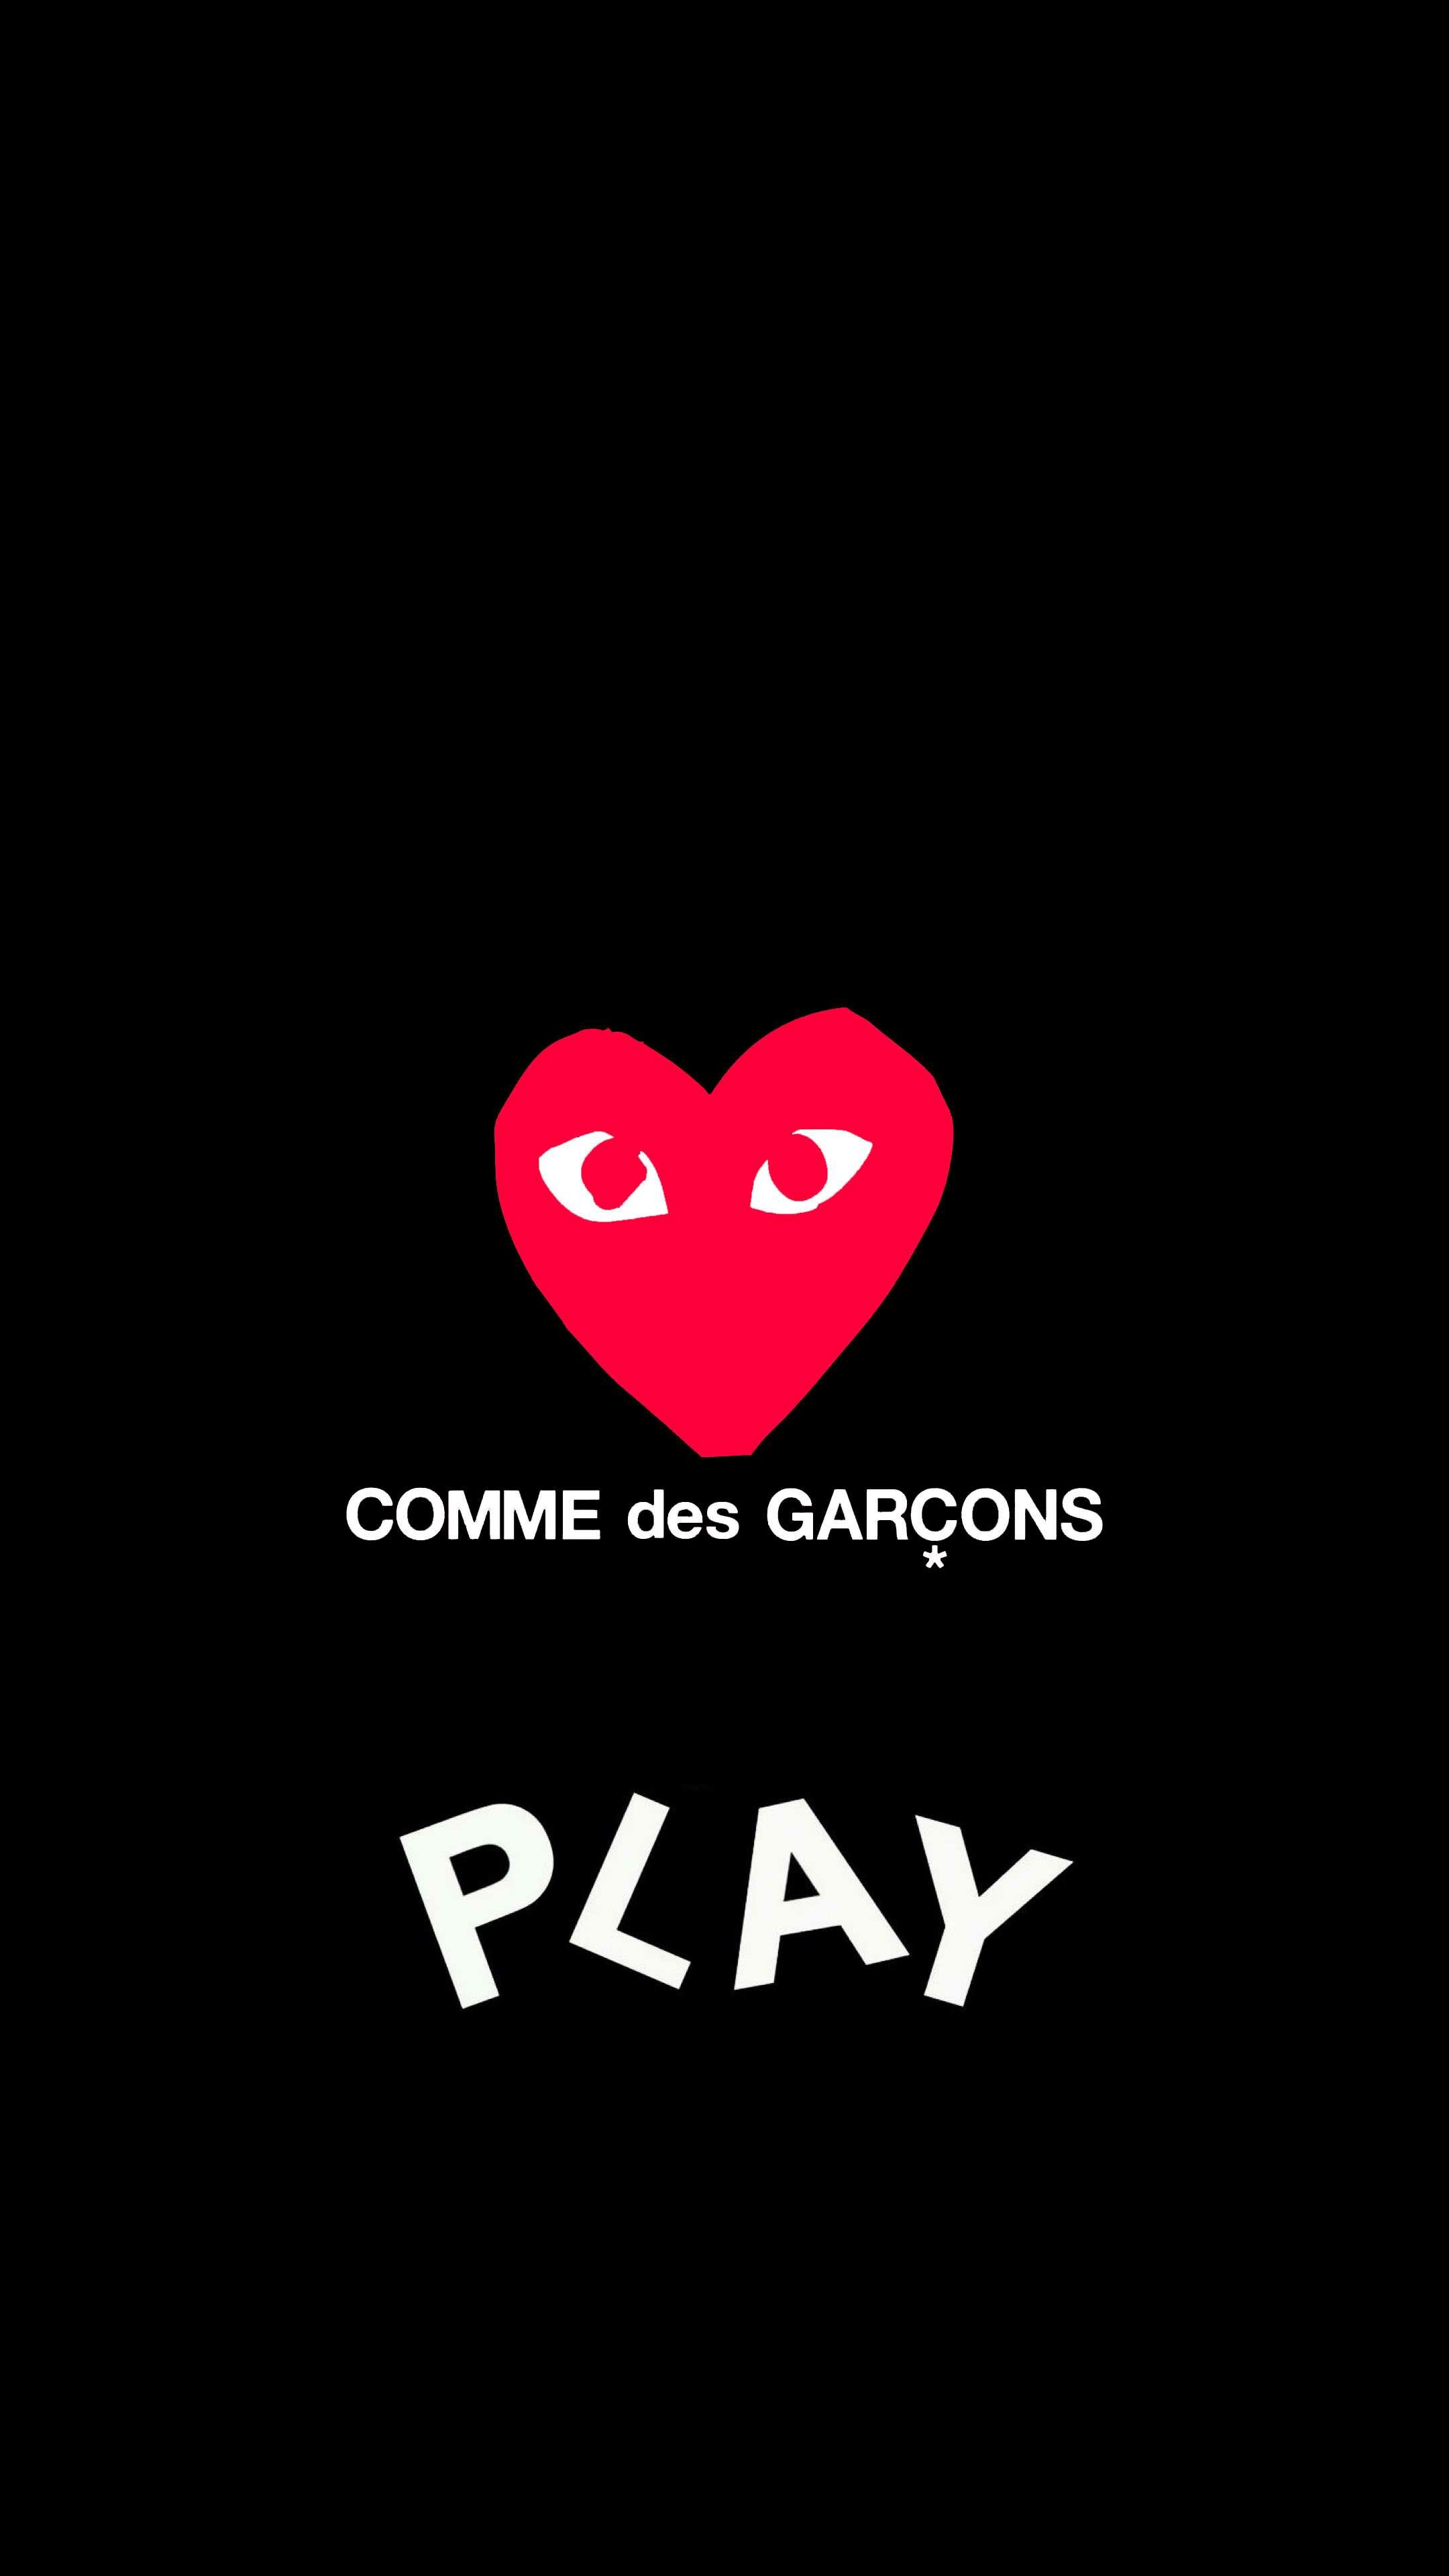 HD wallpaper, Evolution Of The Brand, 2160X3840 4K Phone, Comme Des Garcons, Samsung 4K Comme Des Garcons Background, Stylish Wallpapers, Chic Aesthetics